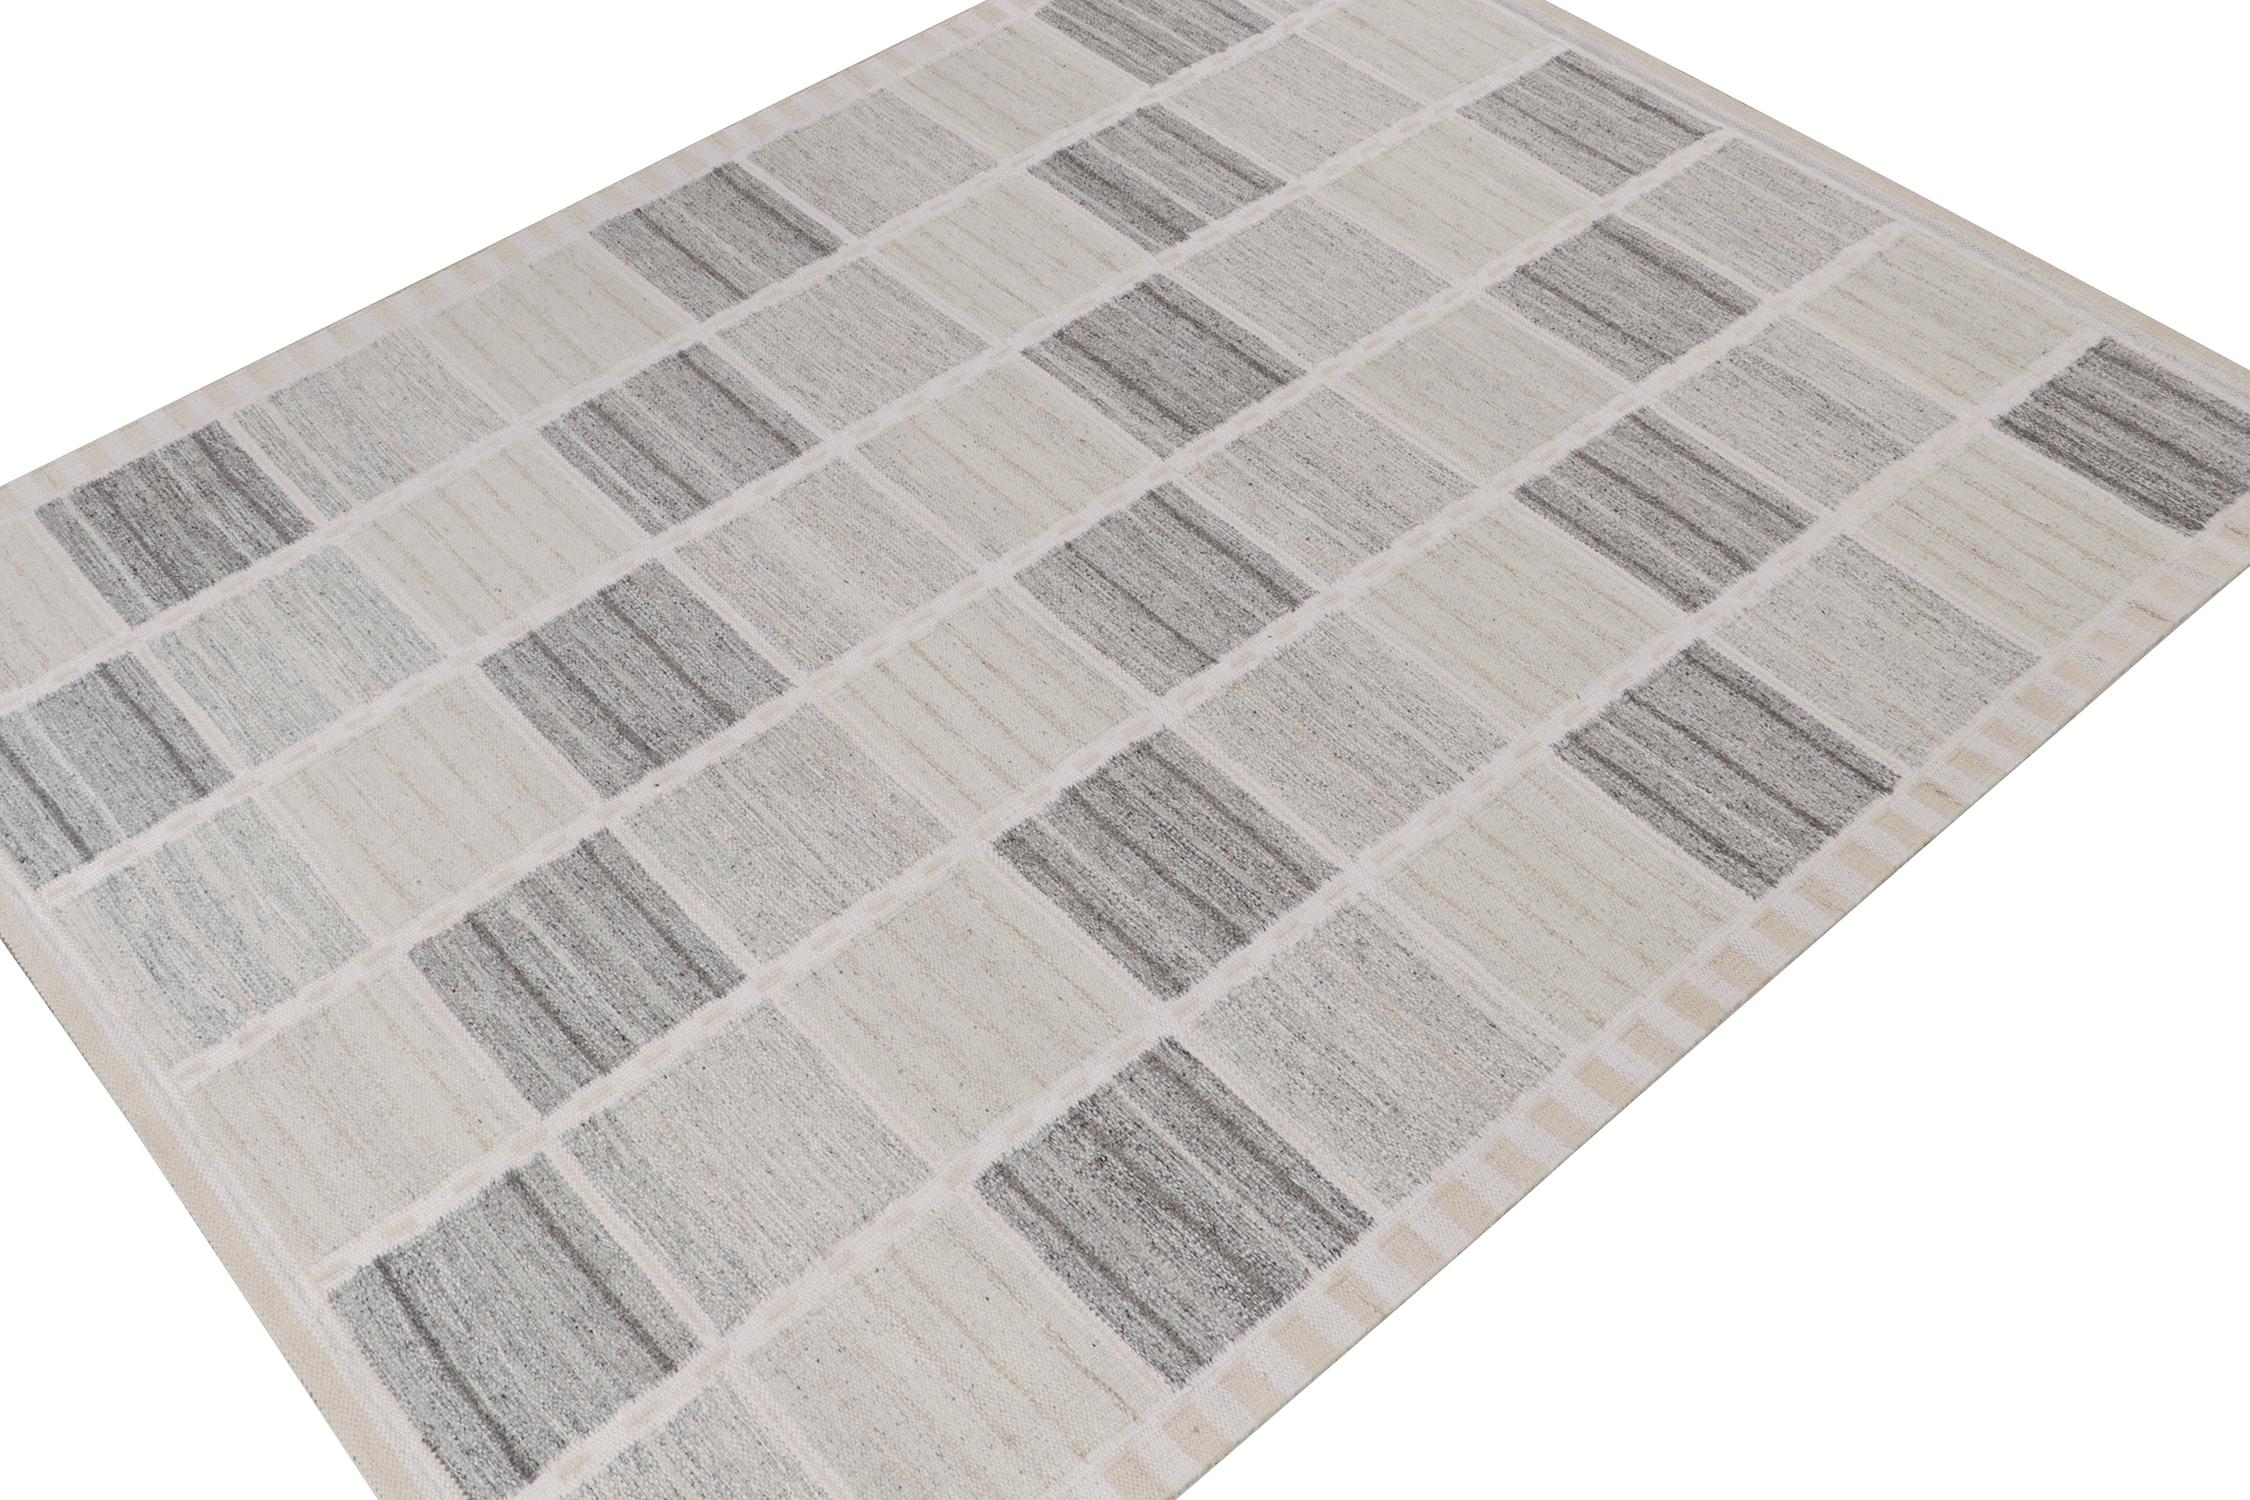 This Swedish style custom kilim design is new to Rug & Kilim's award-winning Scandinavian flat weave collection. Handwoven in wool. 
Further on the design: 
This rug enjoys a pleasing sense of movement with crisp greige colors born of white, gray,